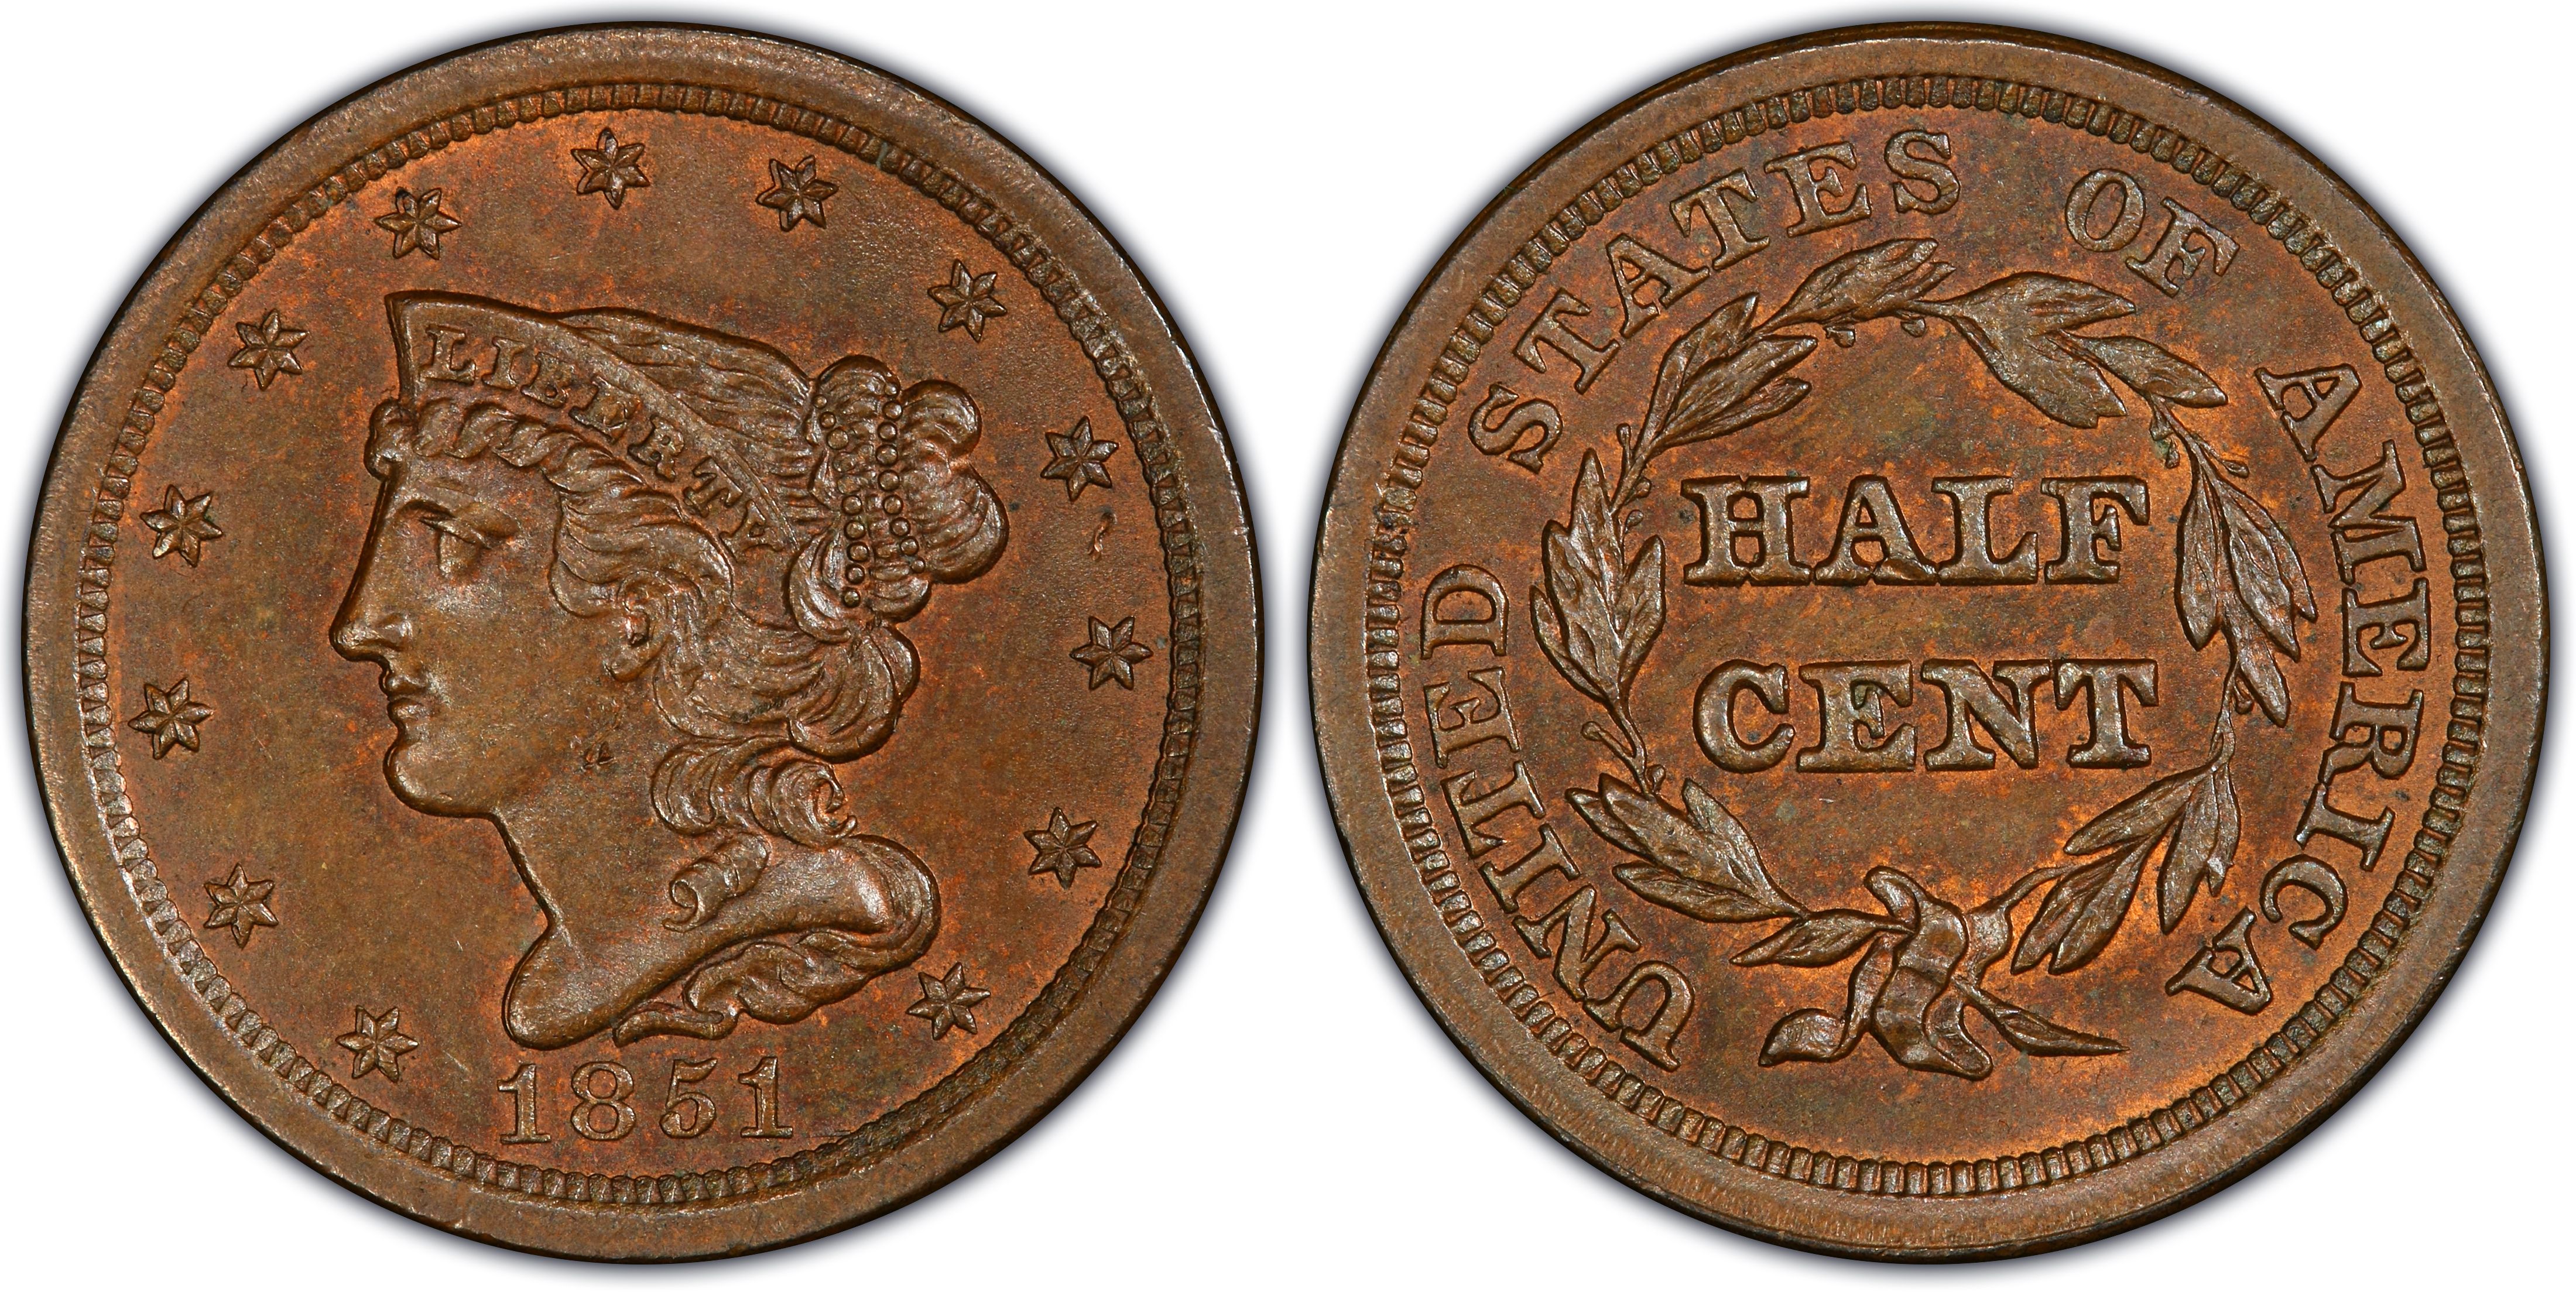 1851 Braided Hair Half Cent. C-1, the only known dies. Rarity-1. EF-40 BN  (NGC).